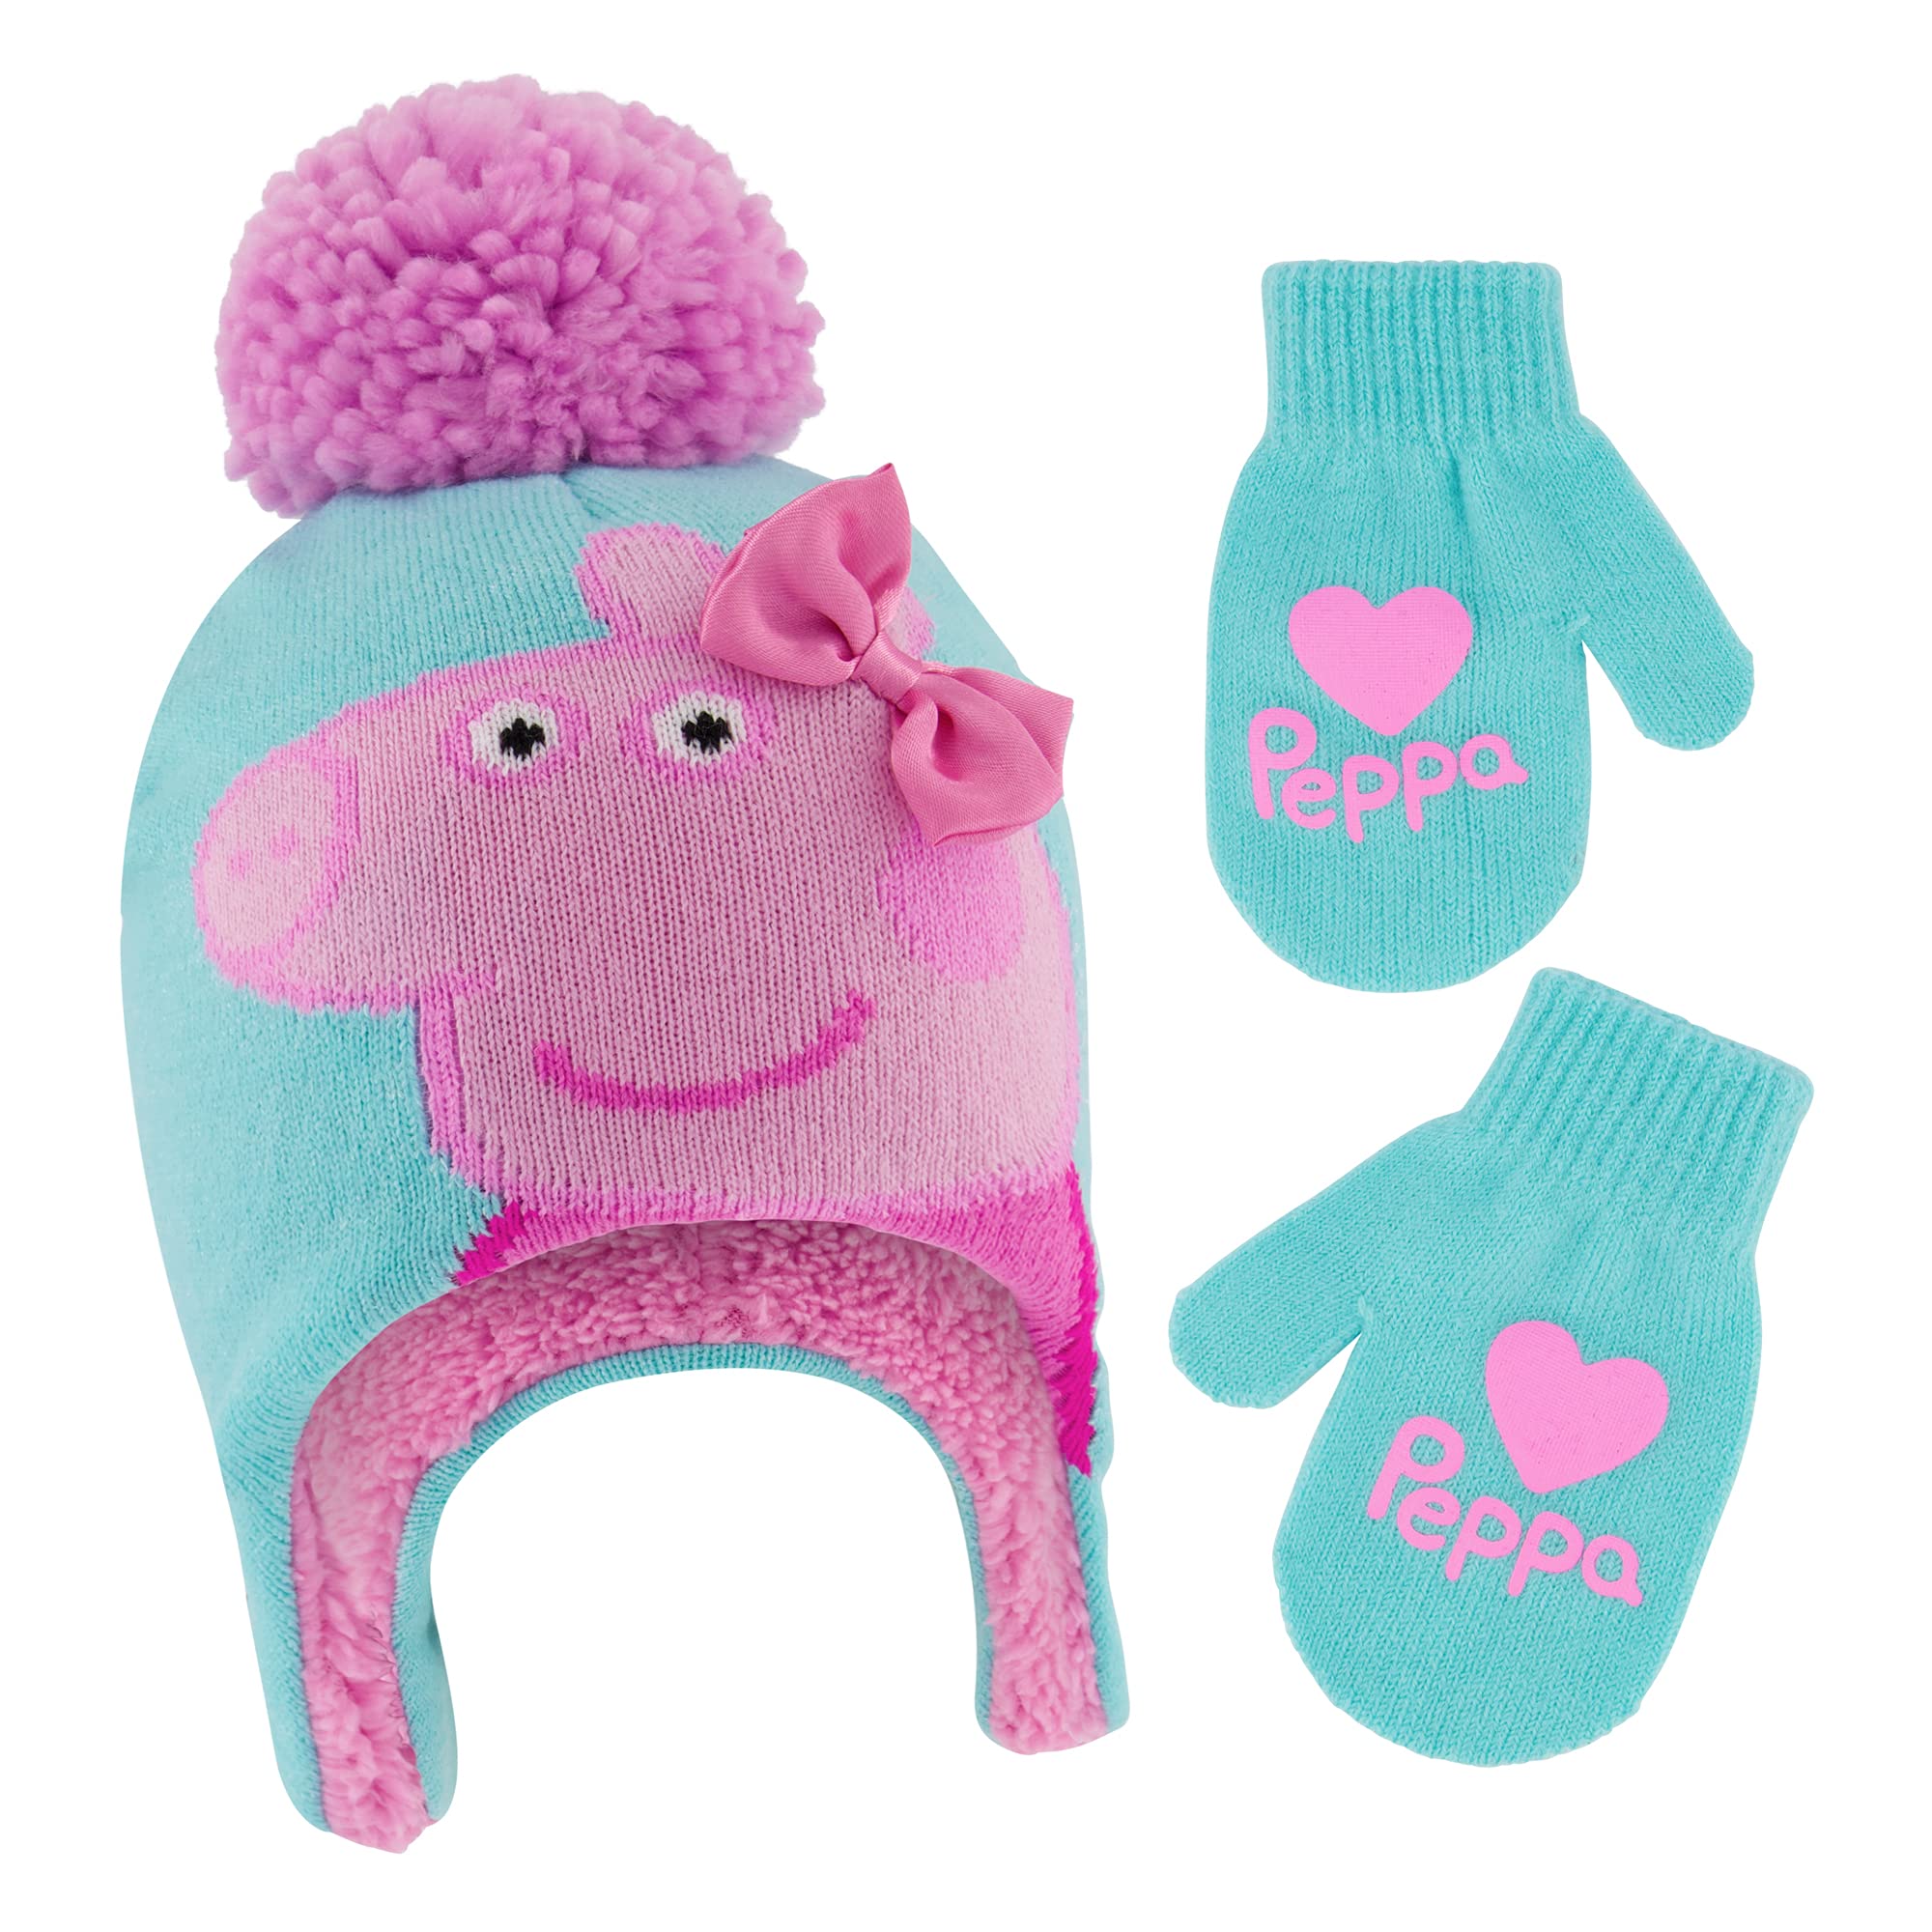 Hasbro Girls Winter Accessory Hat and Mittens Set, Peppa Pig Beanie for Toddler Ages 2-4, Blue/Pink